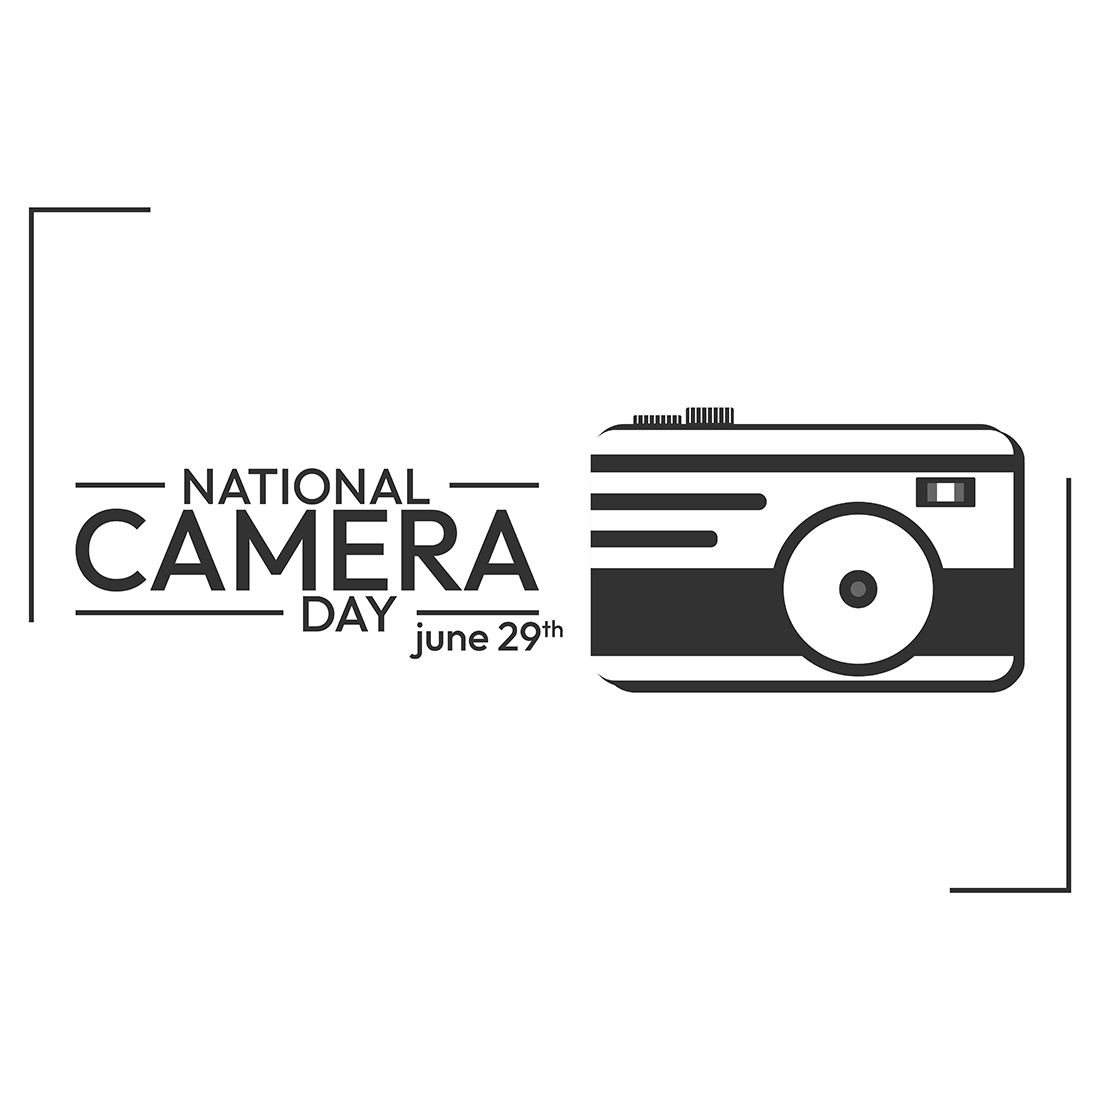 National Camera Day cover image.